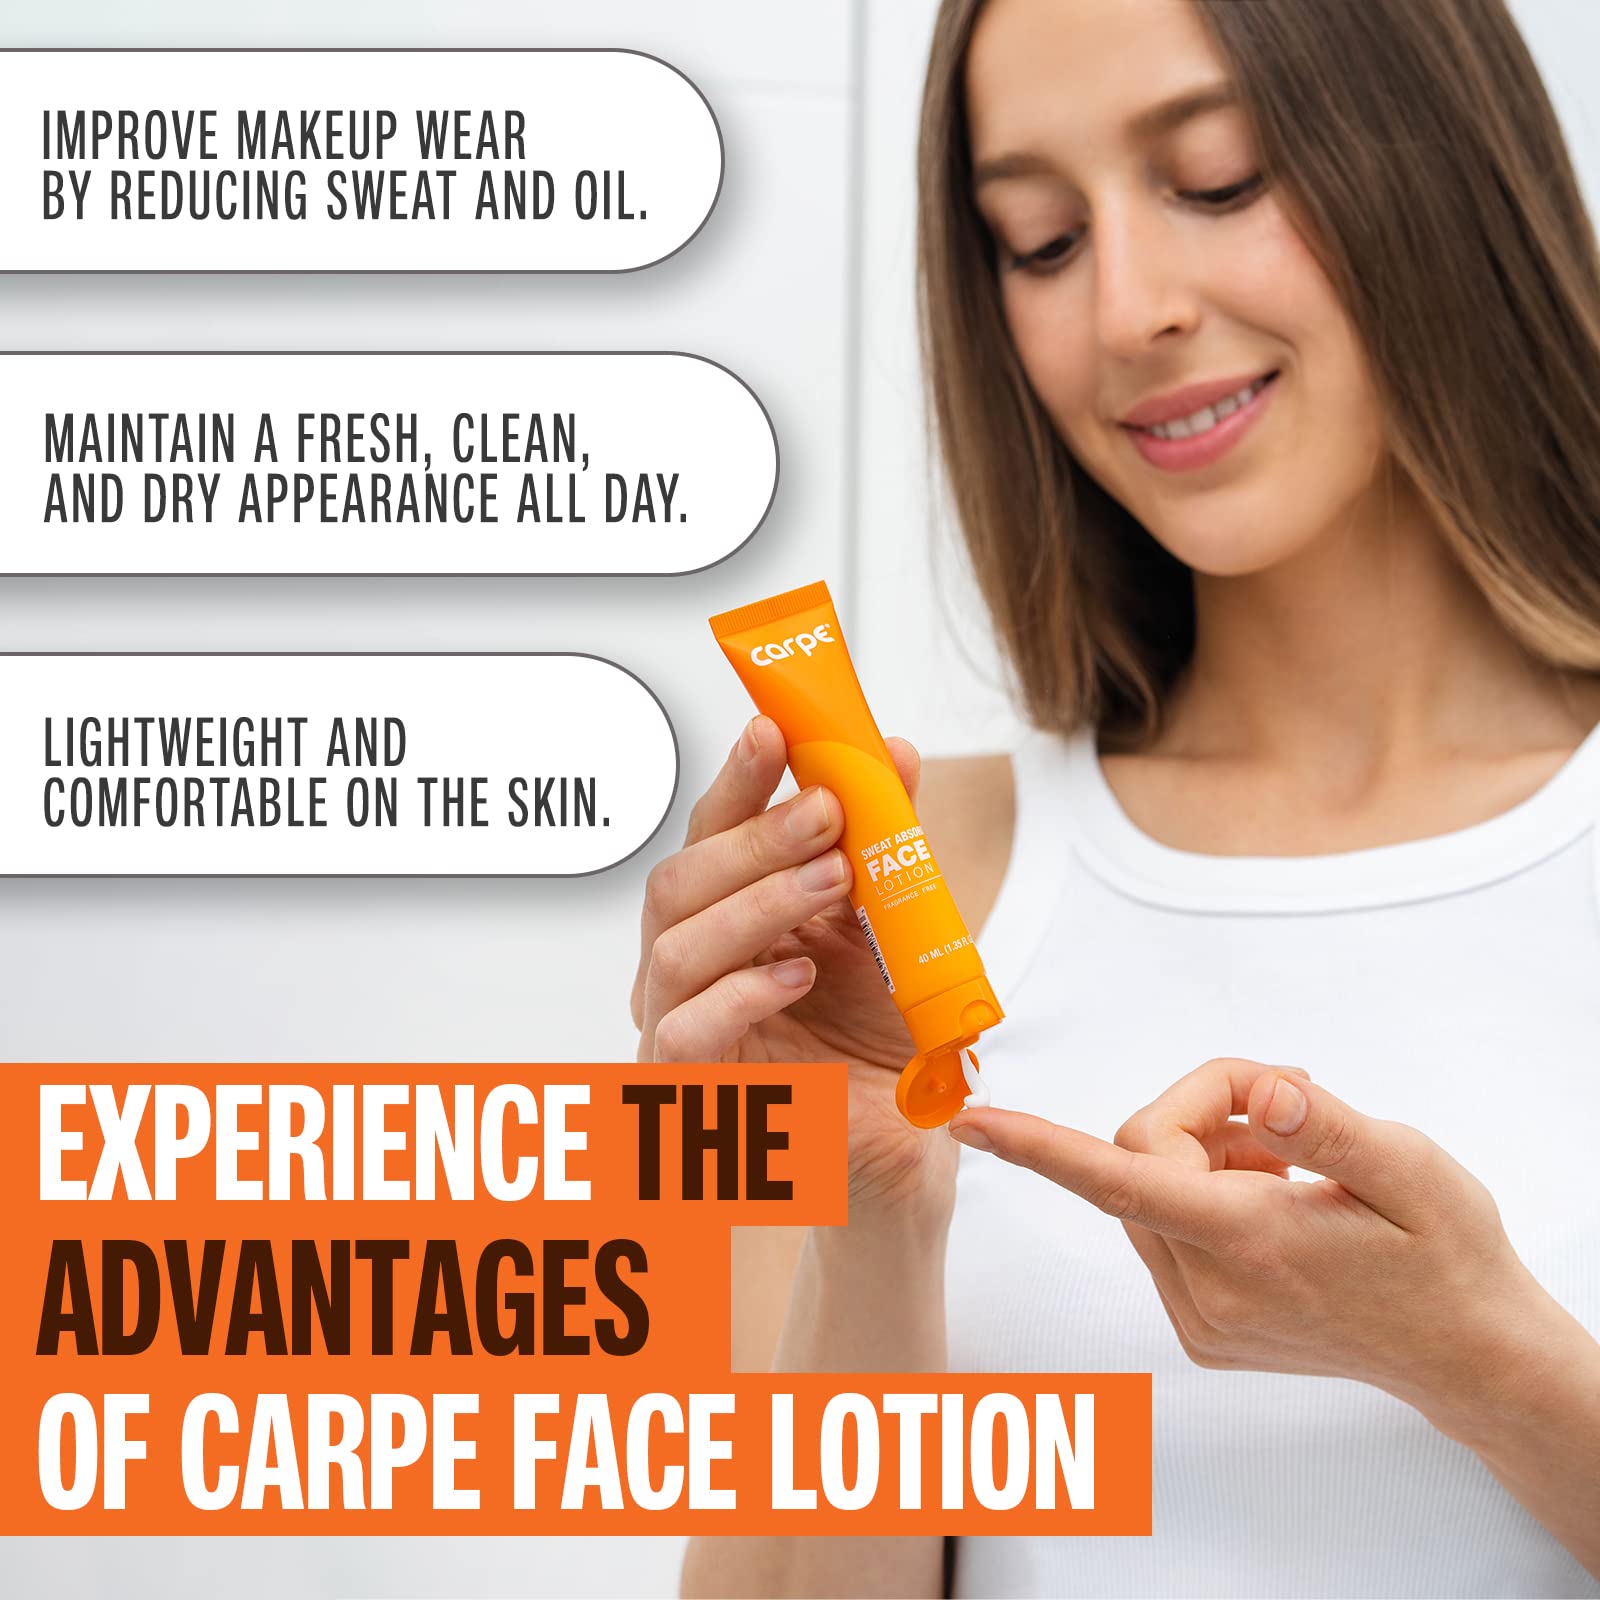 Carpe - Helps Keep Your Face, Forehead, and Scalp Dry - Sweat Absorbing Gelled Lotion - Plus Oily Face Control - With Silica Microspheres and Jojoba Esters